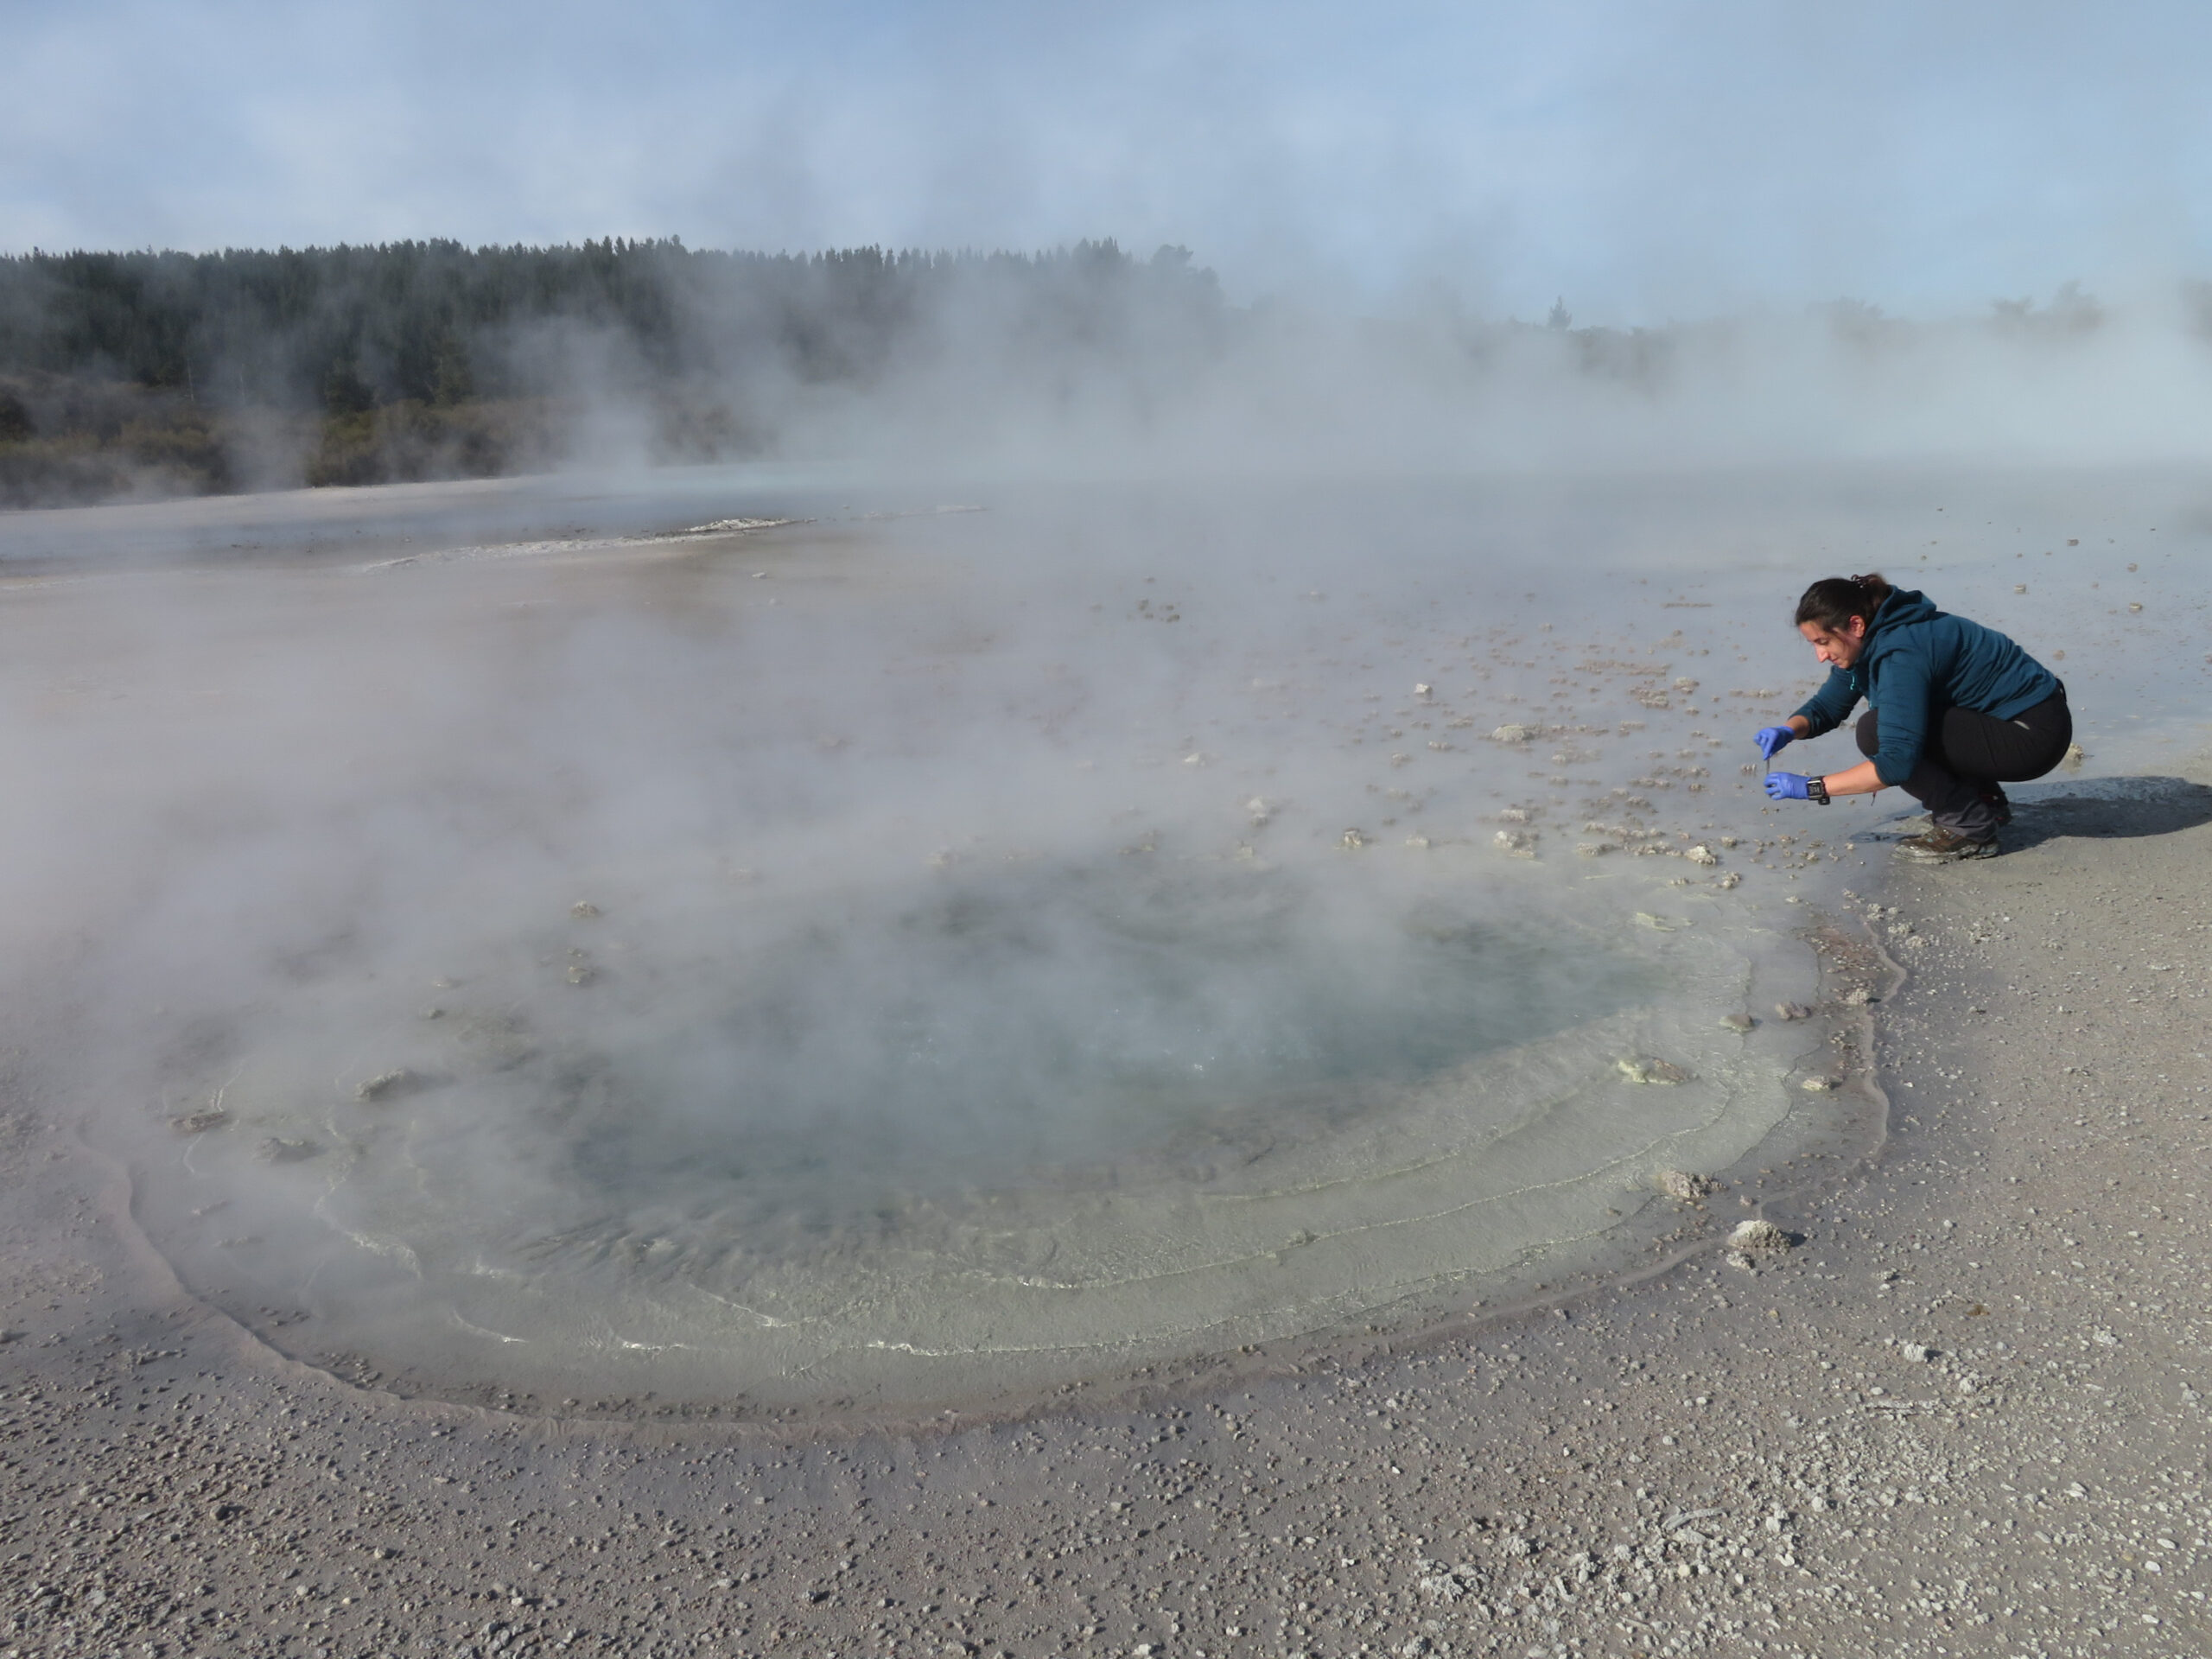 Millan crouches over New Zealand hot spring collecting sample